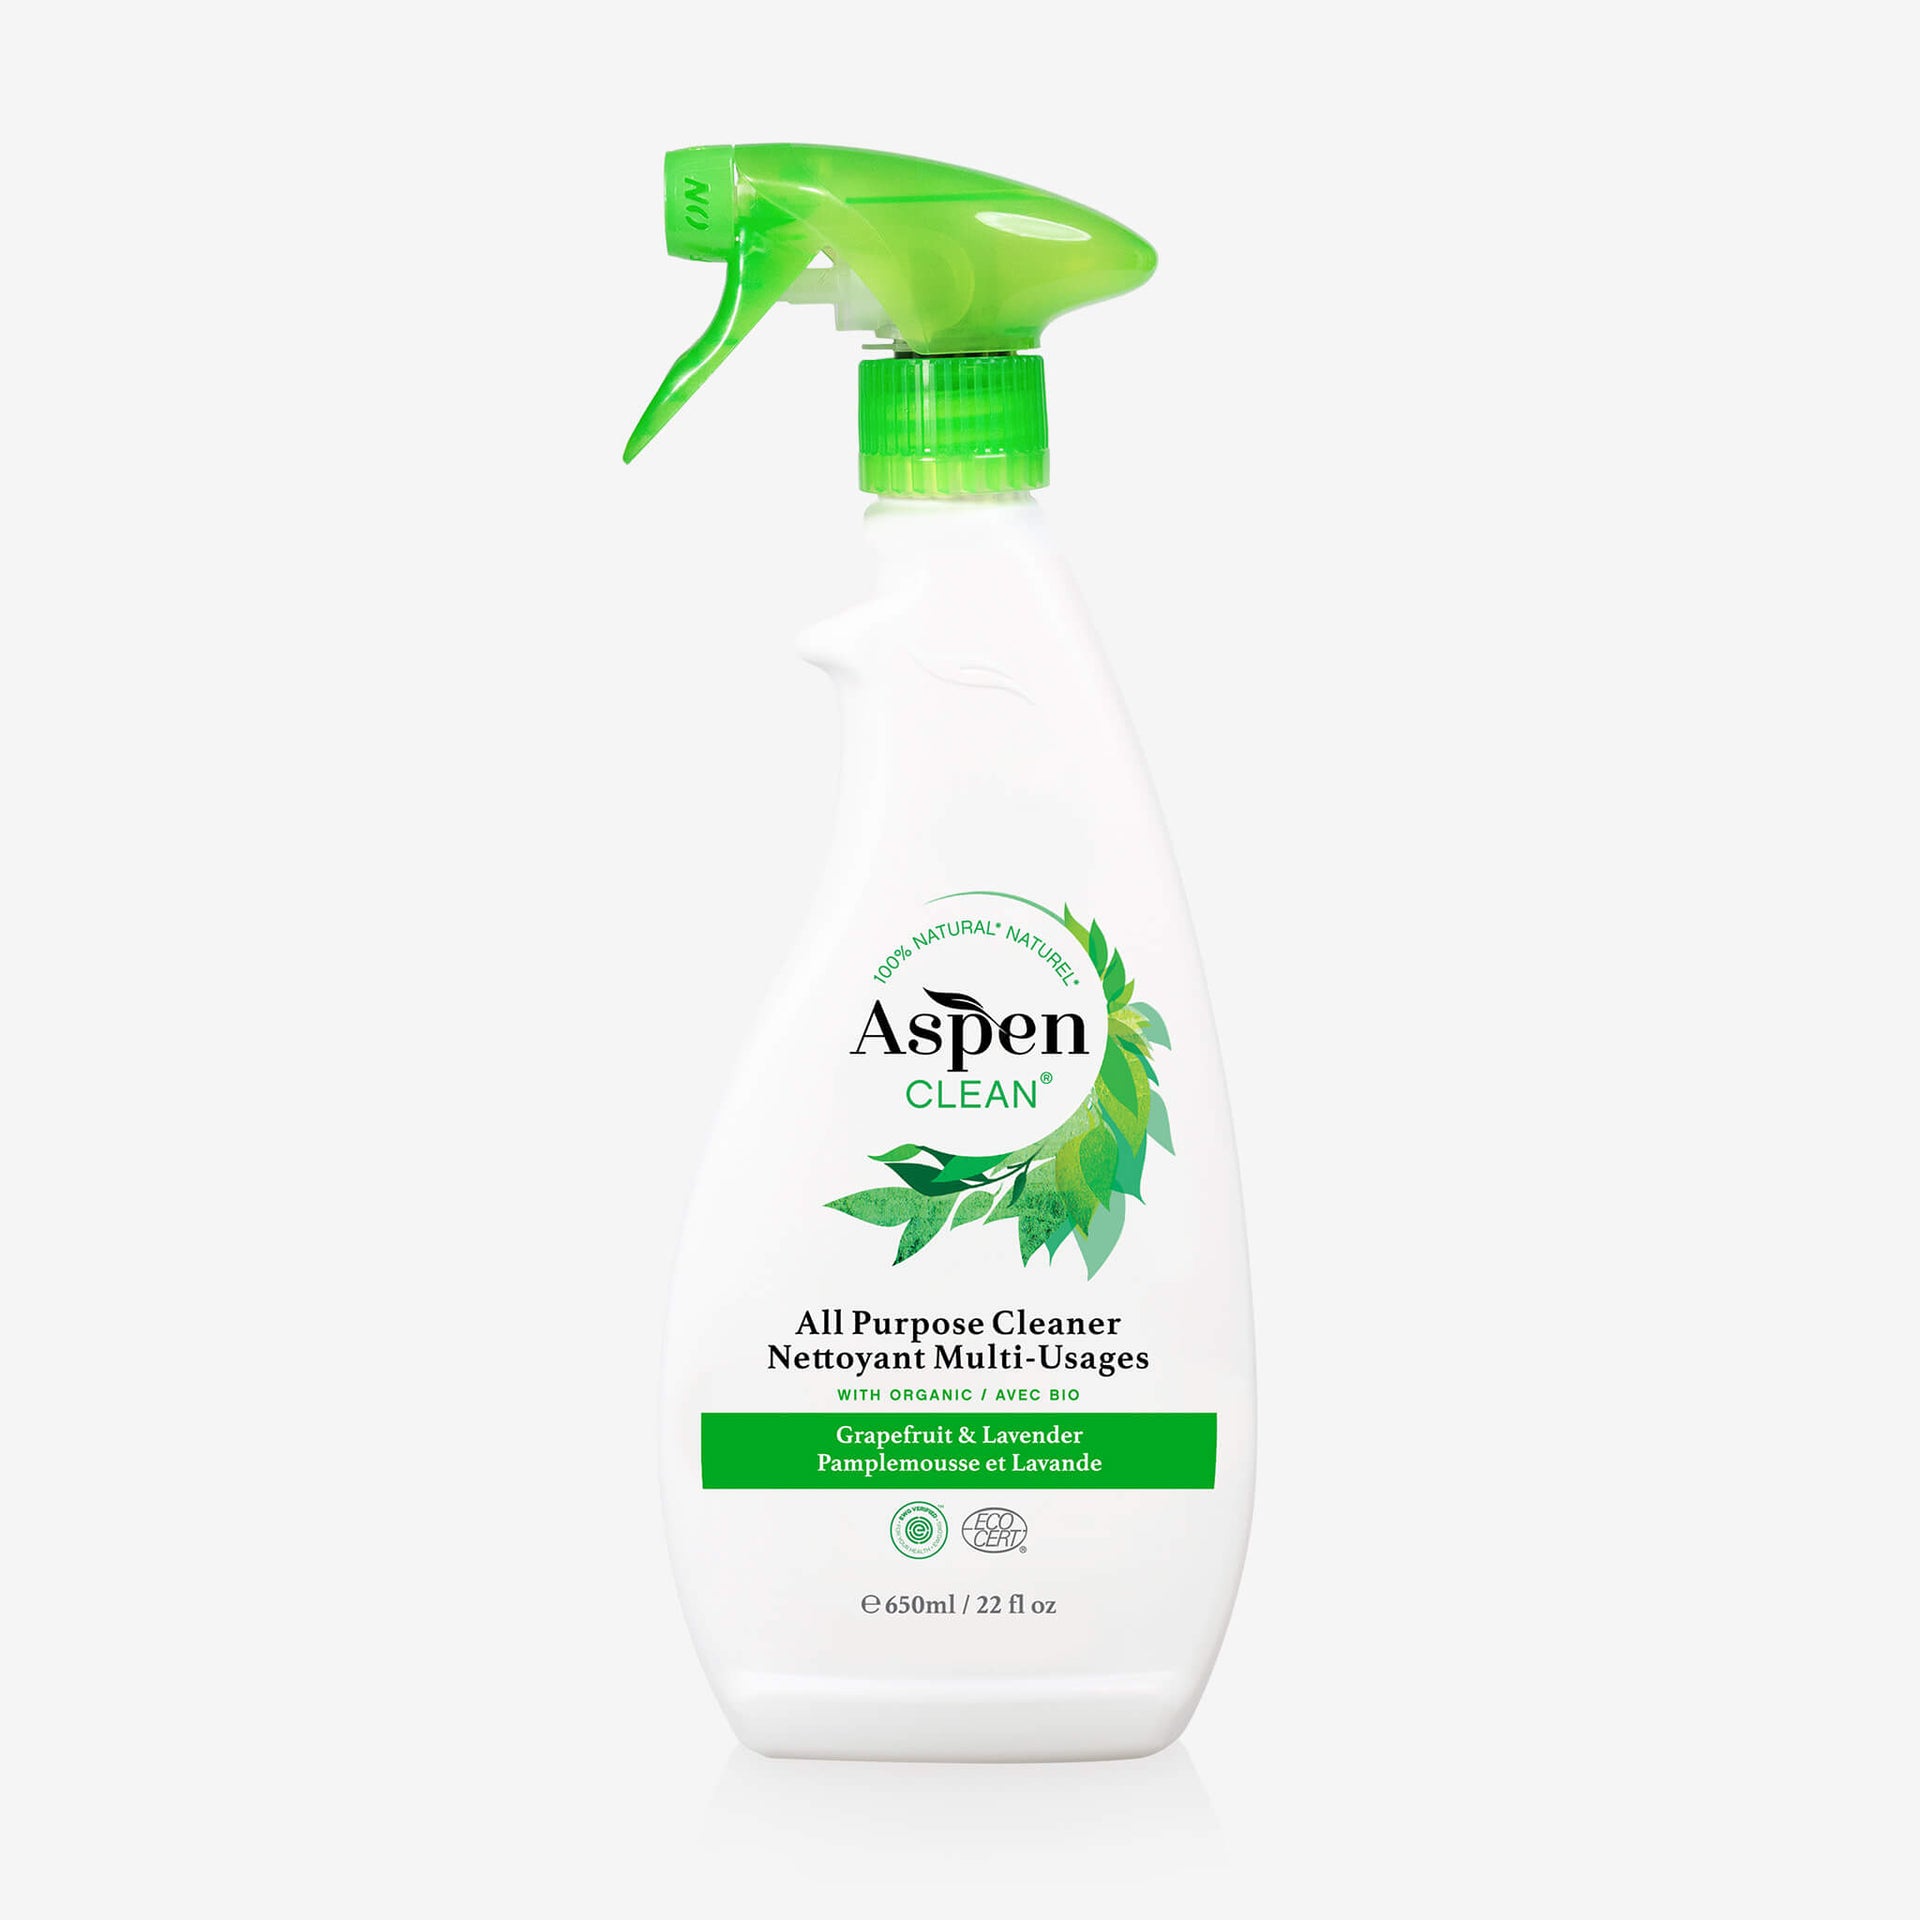 All-Purpose Cleaner, AG Products